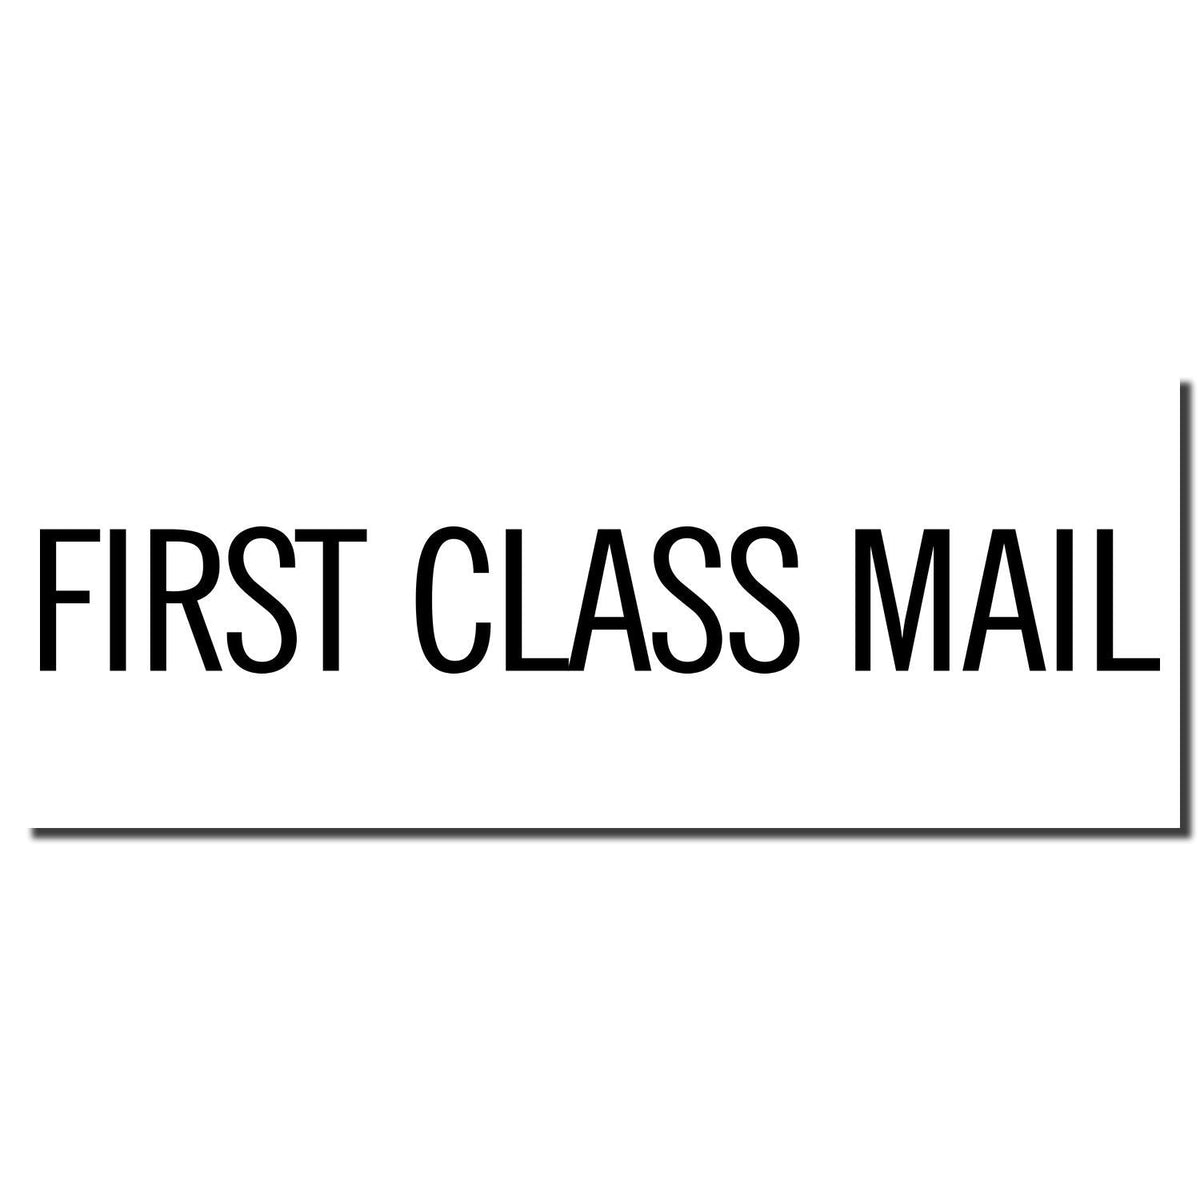 Enlarged Imprint Self-Inking Narrow First Class Mail Stamp Sample